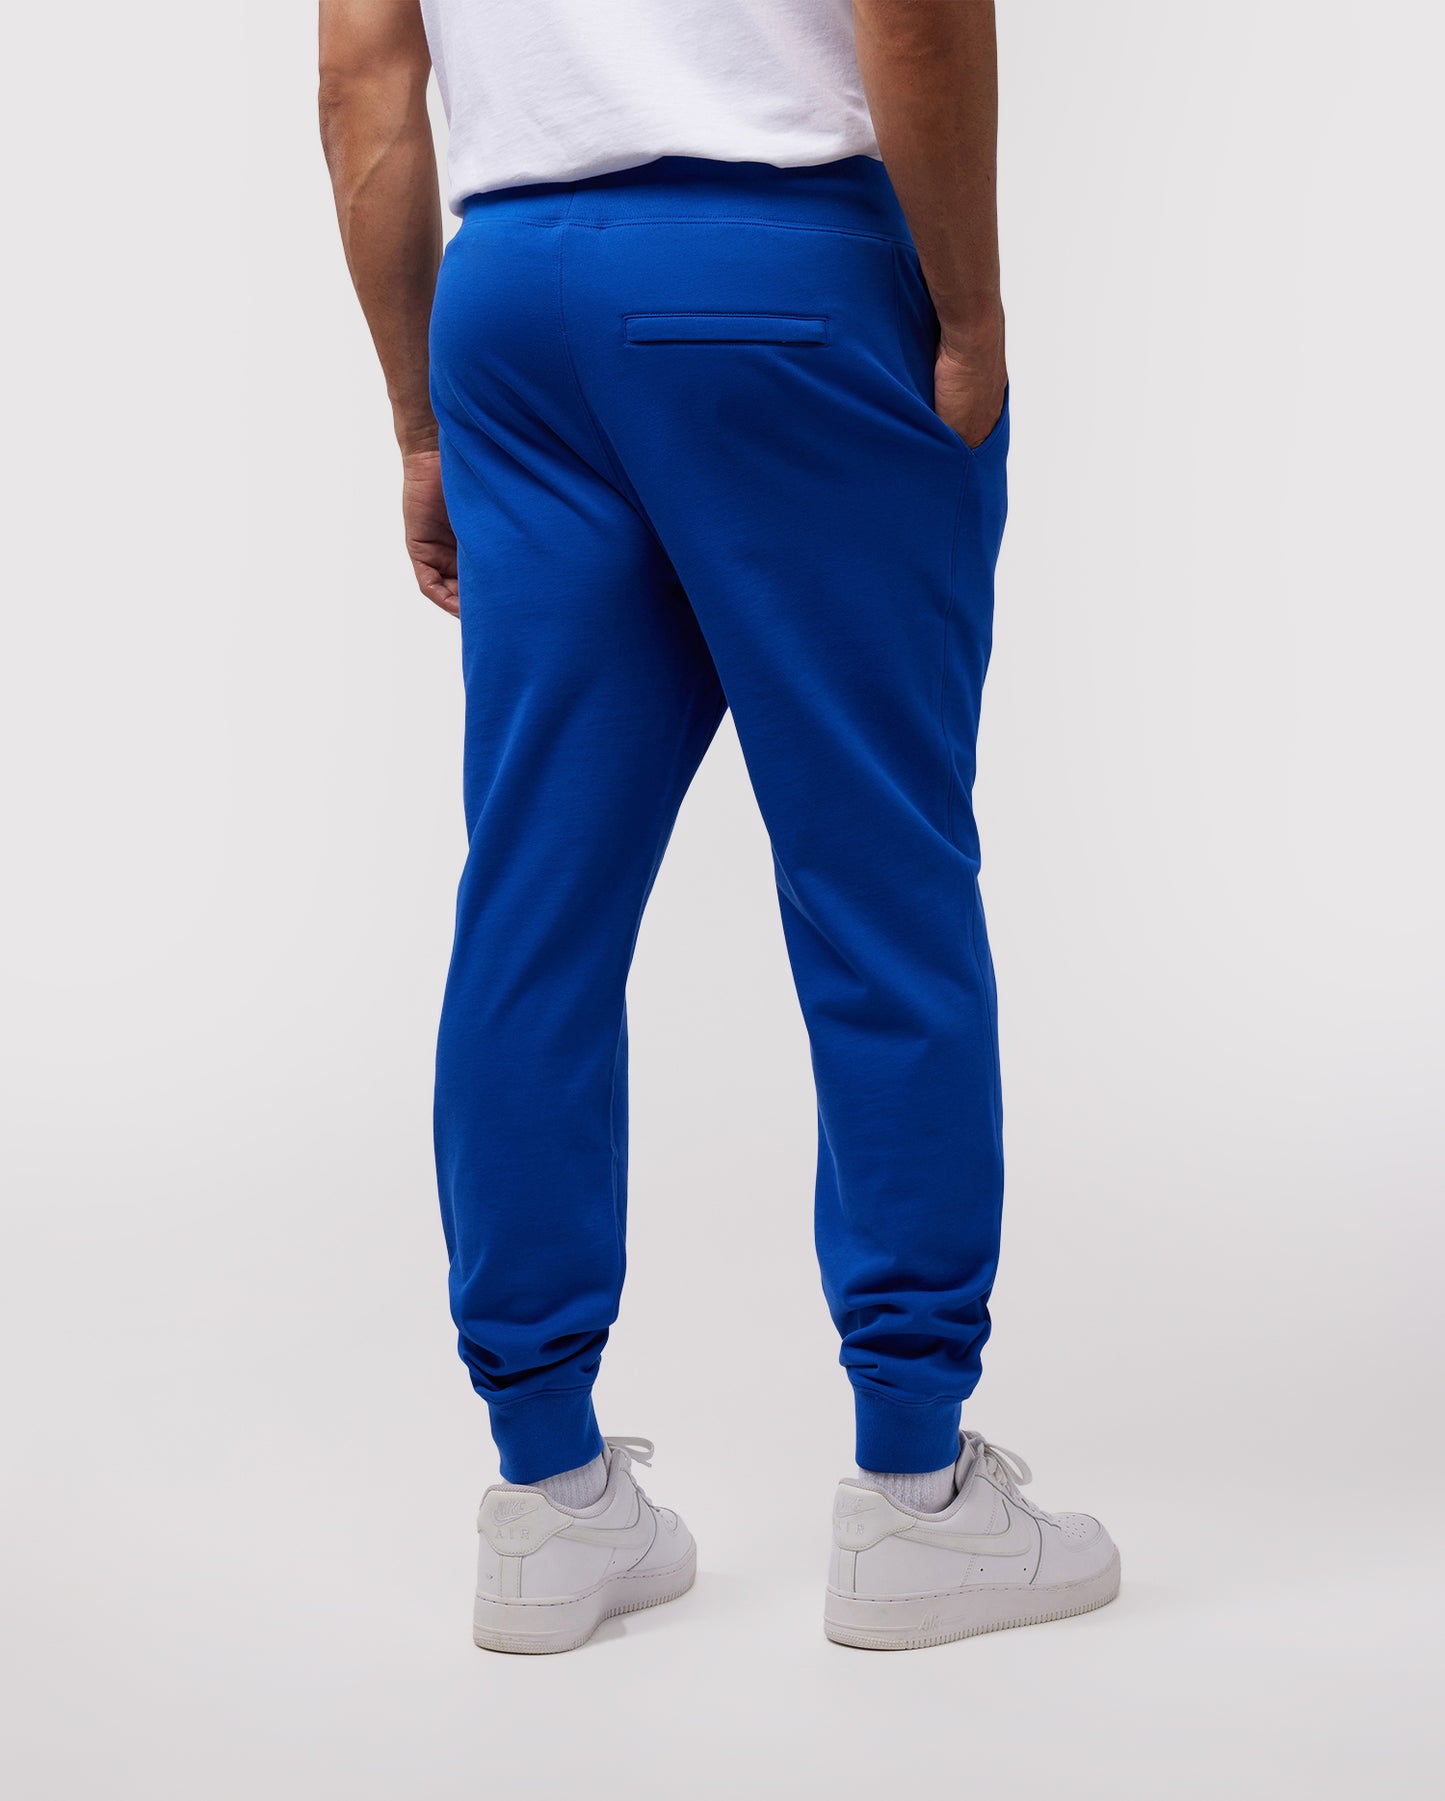 MENS BLUE FRENCH TERRY SWEATPANTS